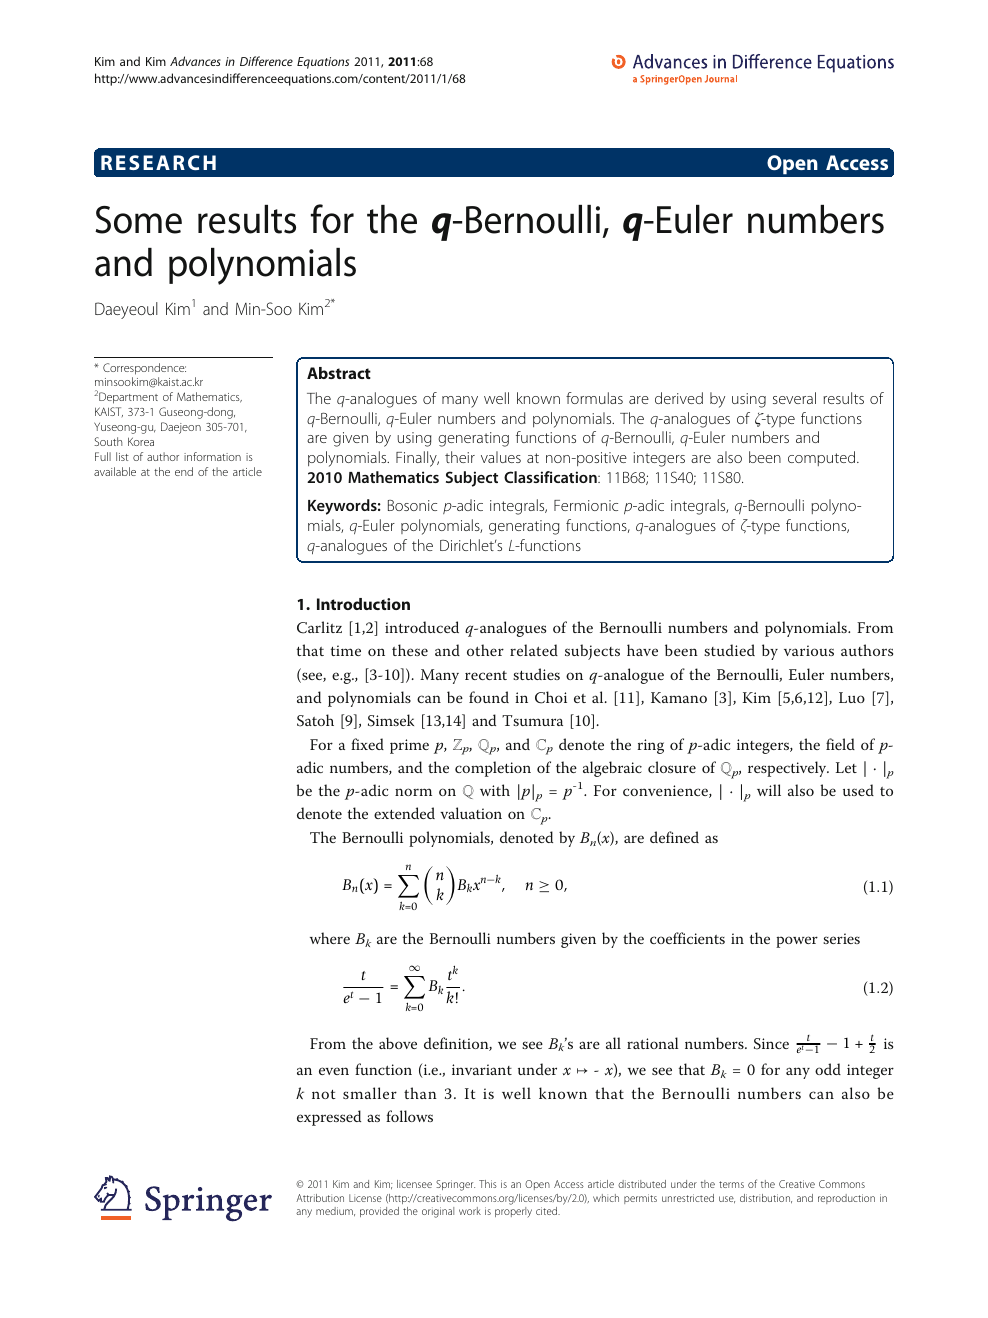 Some Results For The Q Bernoulli Q Euler Numbers And Polynomials Topic Of Research Paper In Mathematics Download Scholarly Article Pdf And Read For Free On Cyberleninka Open Science Hub